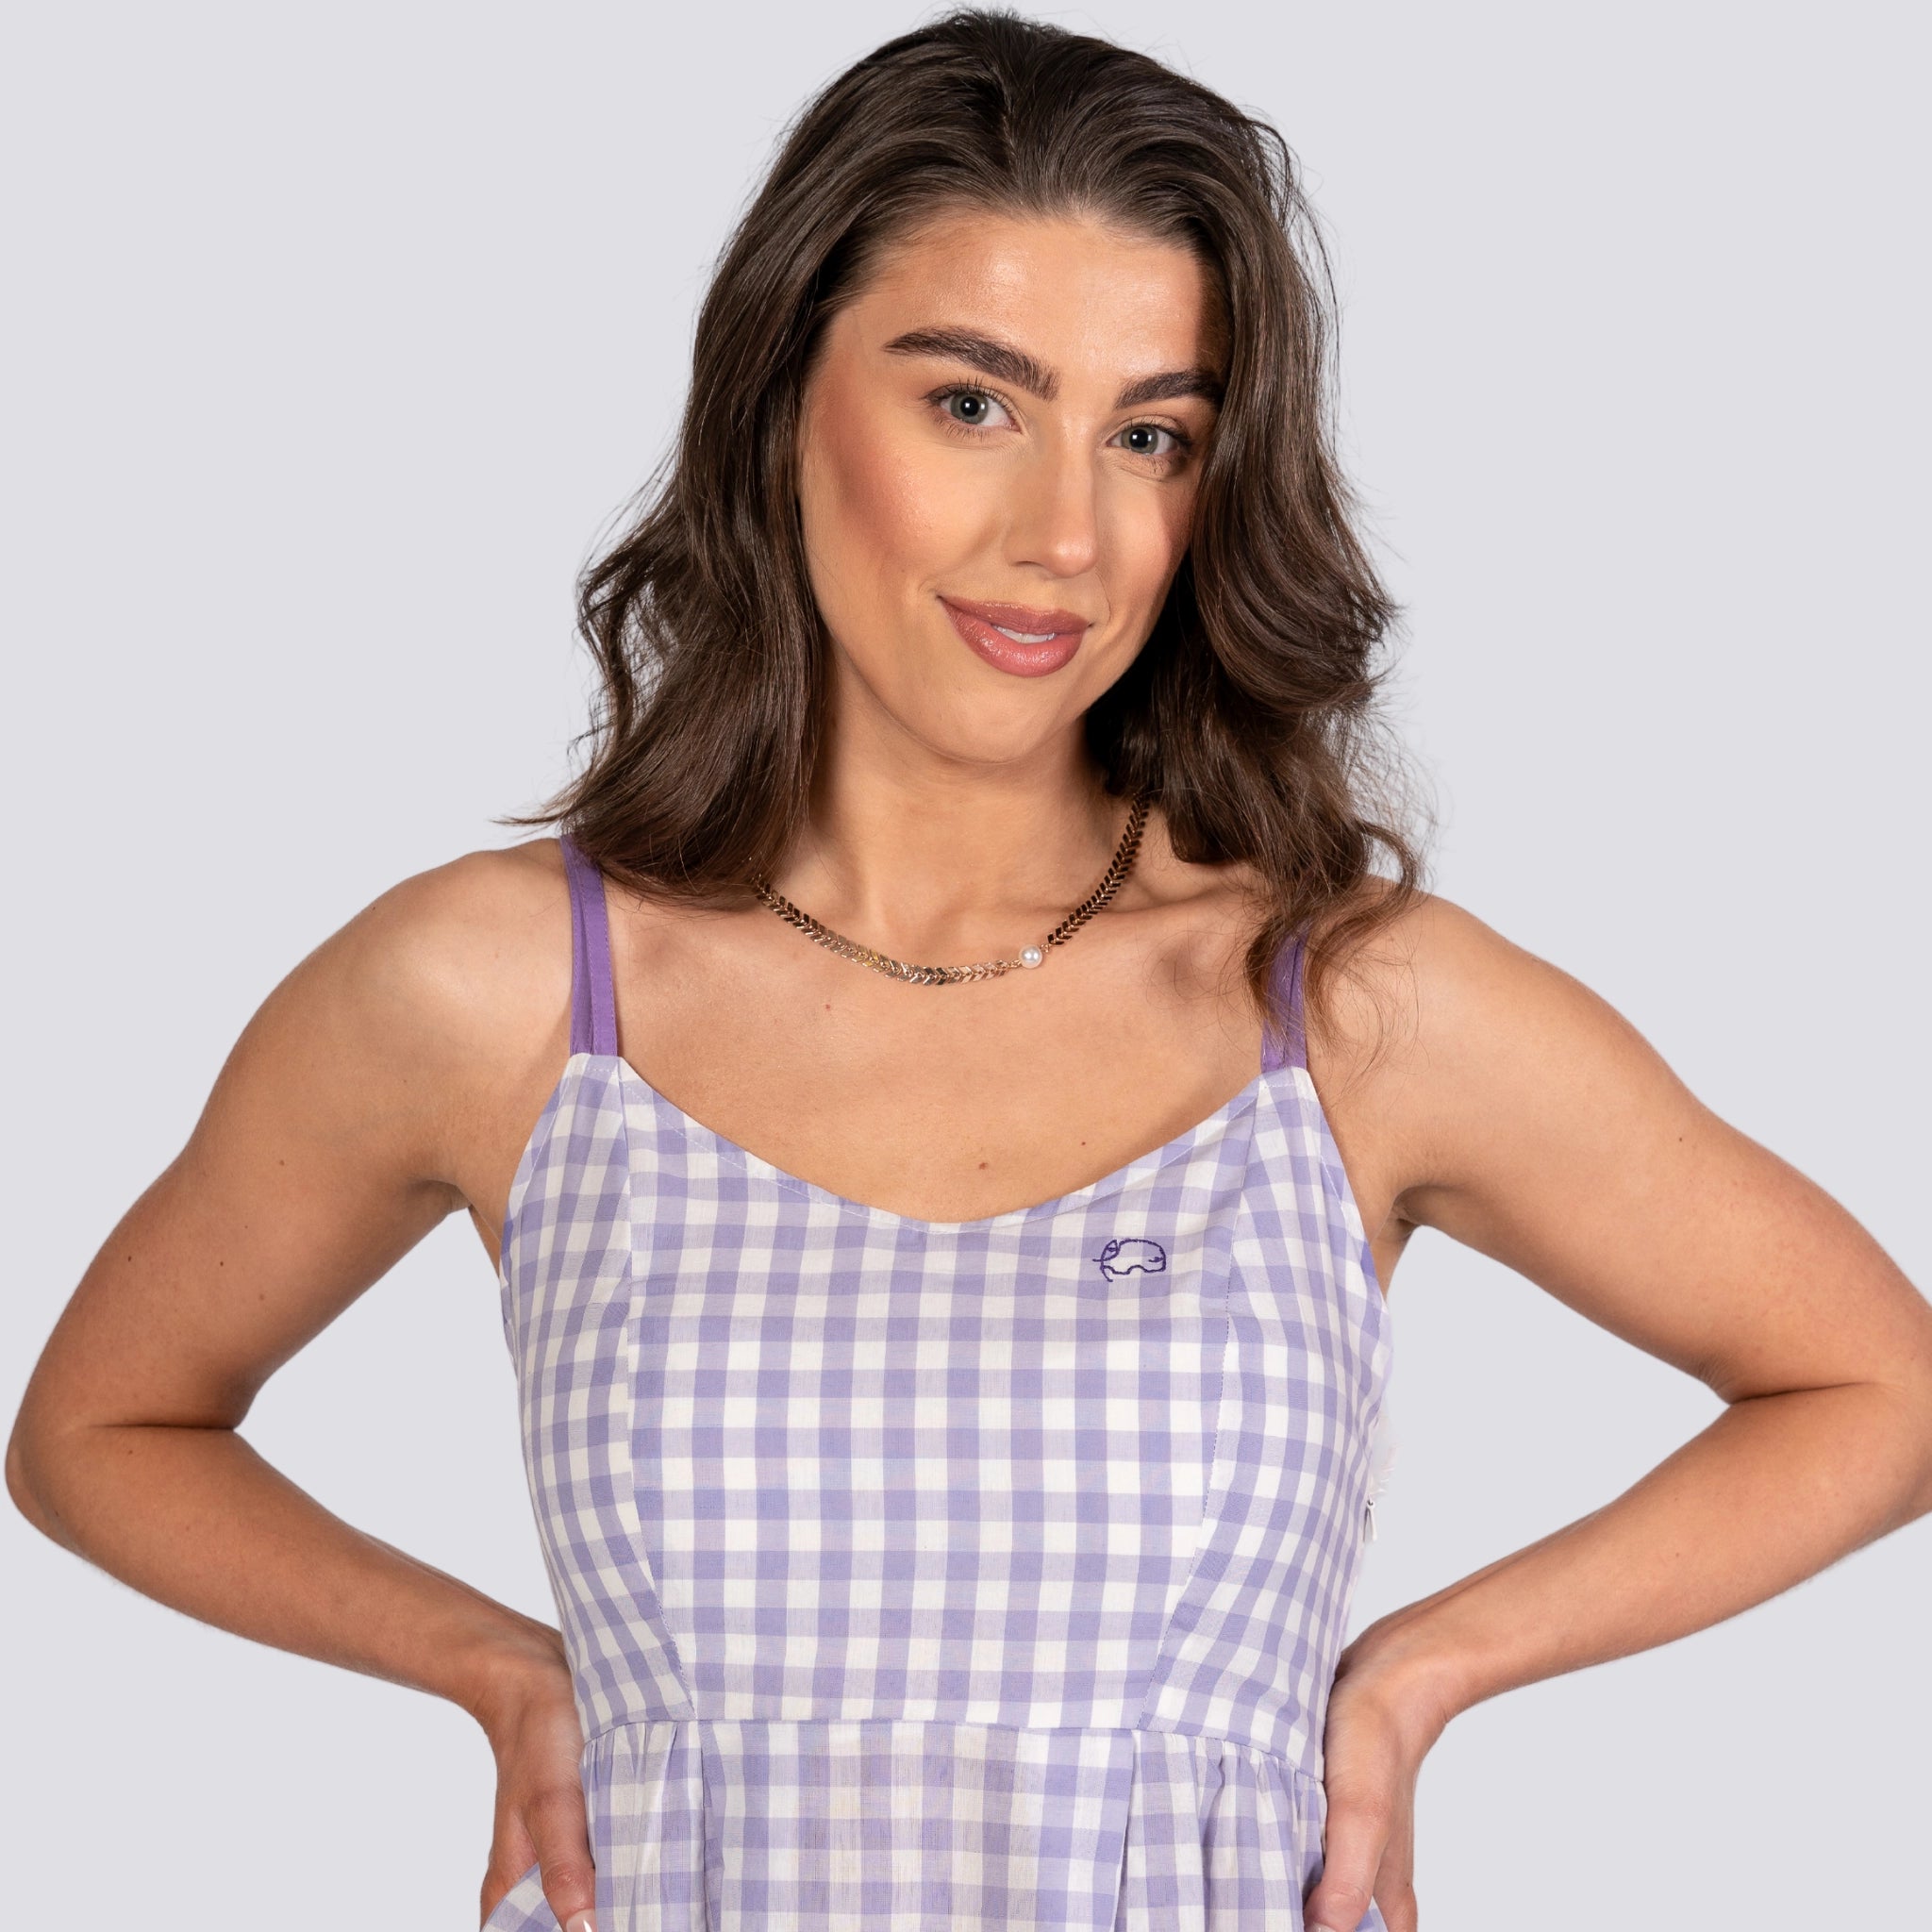 A woman stands with her hands on her hips, wearing the Karee Effortless Summer Style: Sustainable Lavender Gingham Mini Dress with a small whale logo. Crafted from breathable cotton, the limited-edition dress complements her long wavy hair as she smiles slightly.